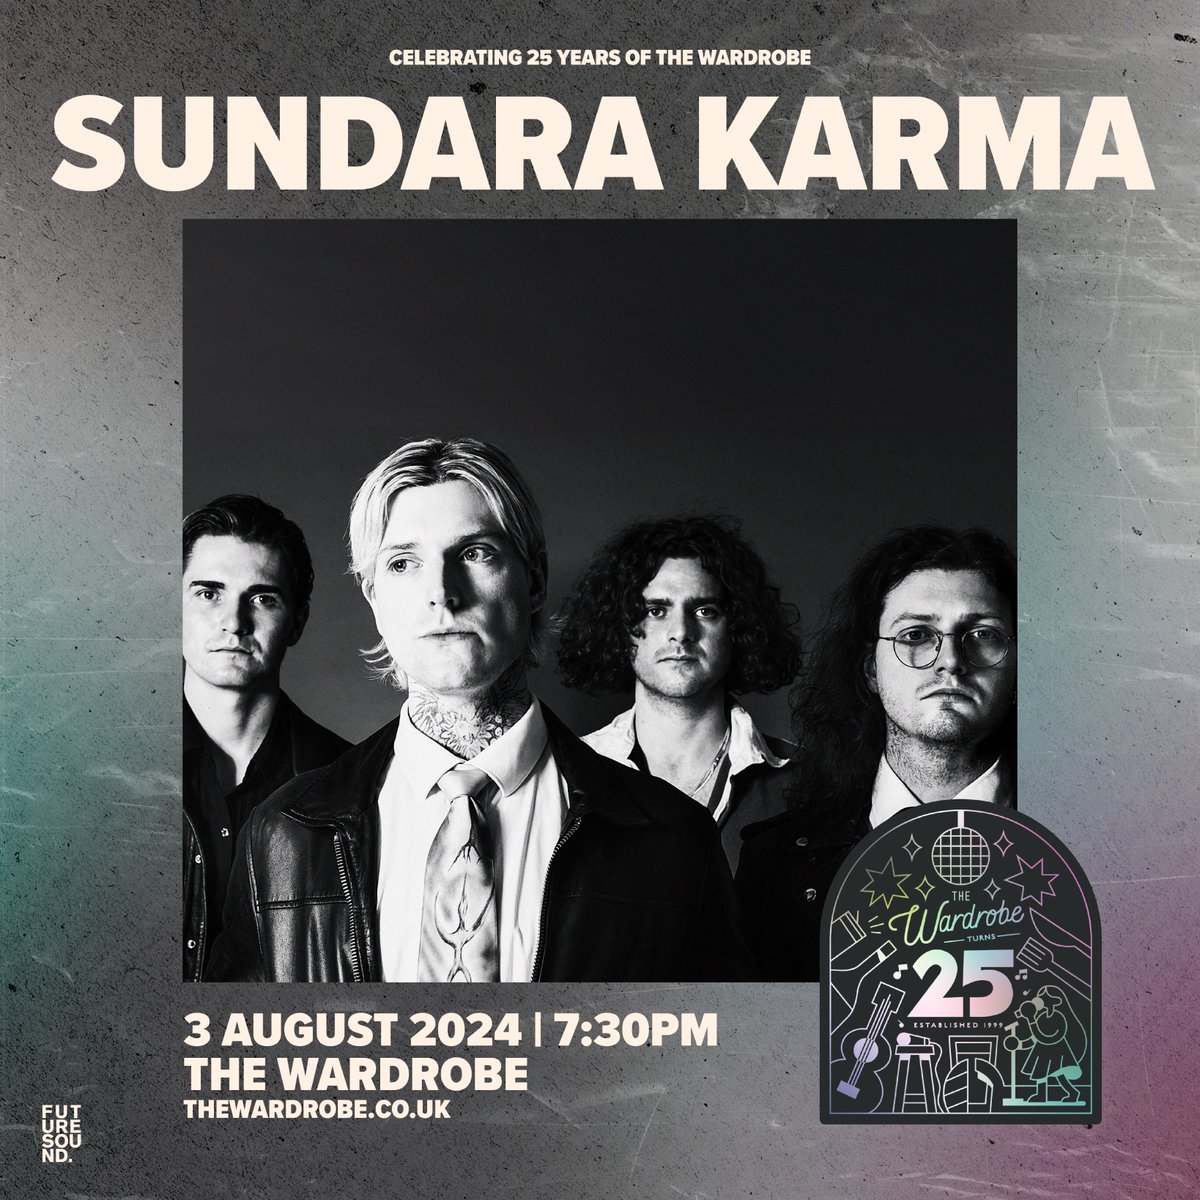 Reading indie rockers @sundarakarma play a special show as part of our 25th Anniversary this August. Tickets go on sale this Friday at 10am ⏰ Tickets available at thewardrobe.co.uk❗️🎟️